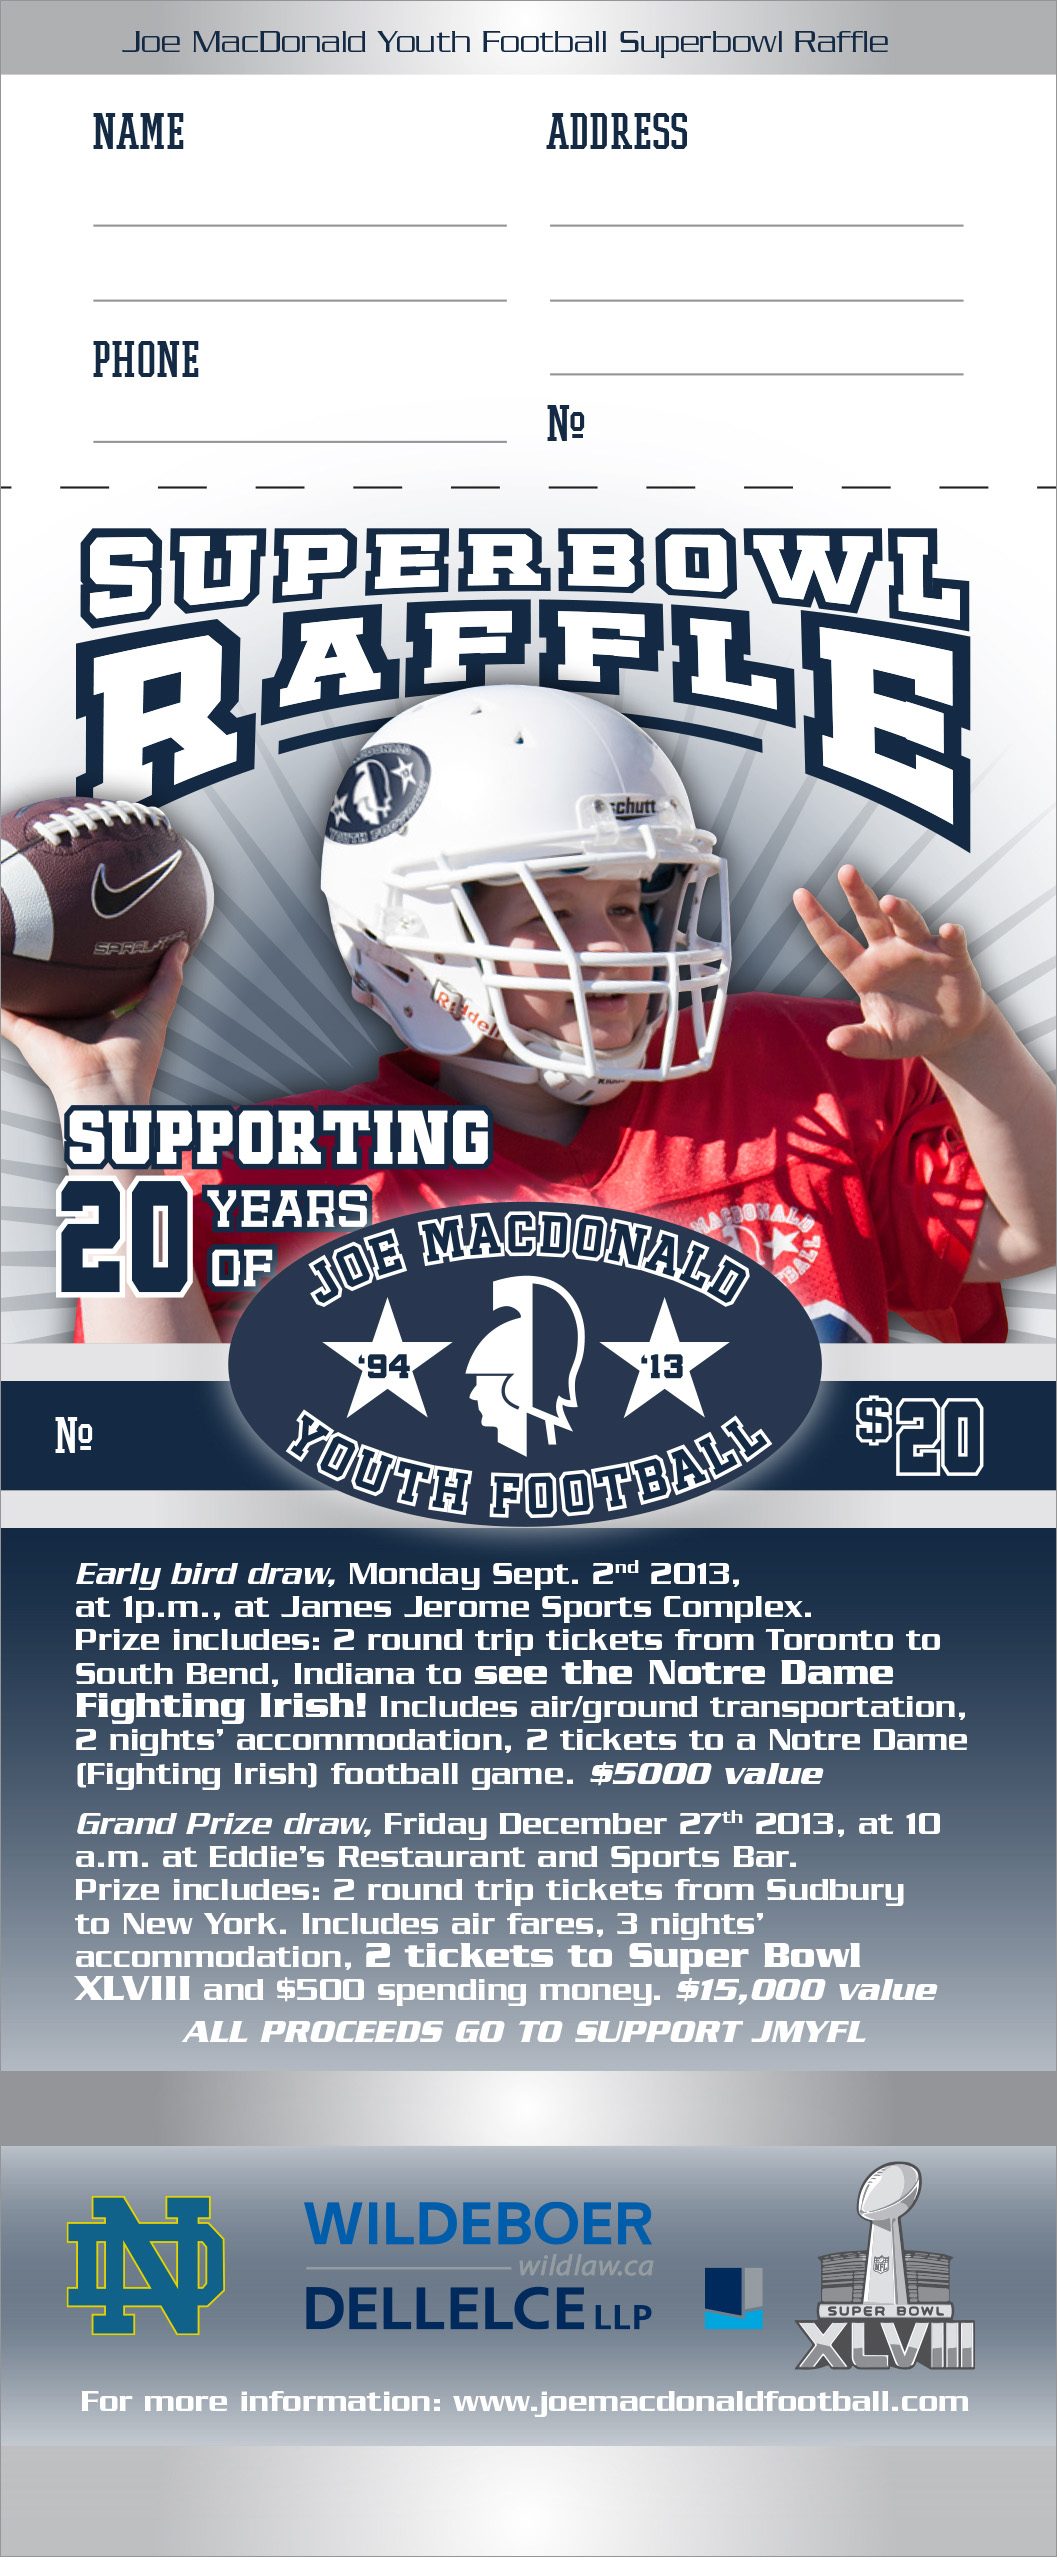 raffle ticket with a youth football player image